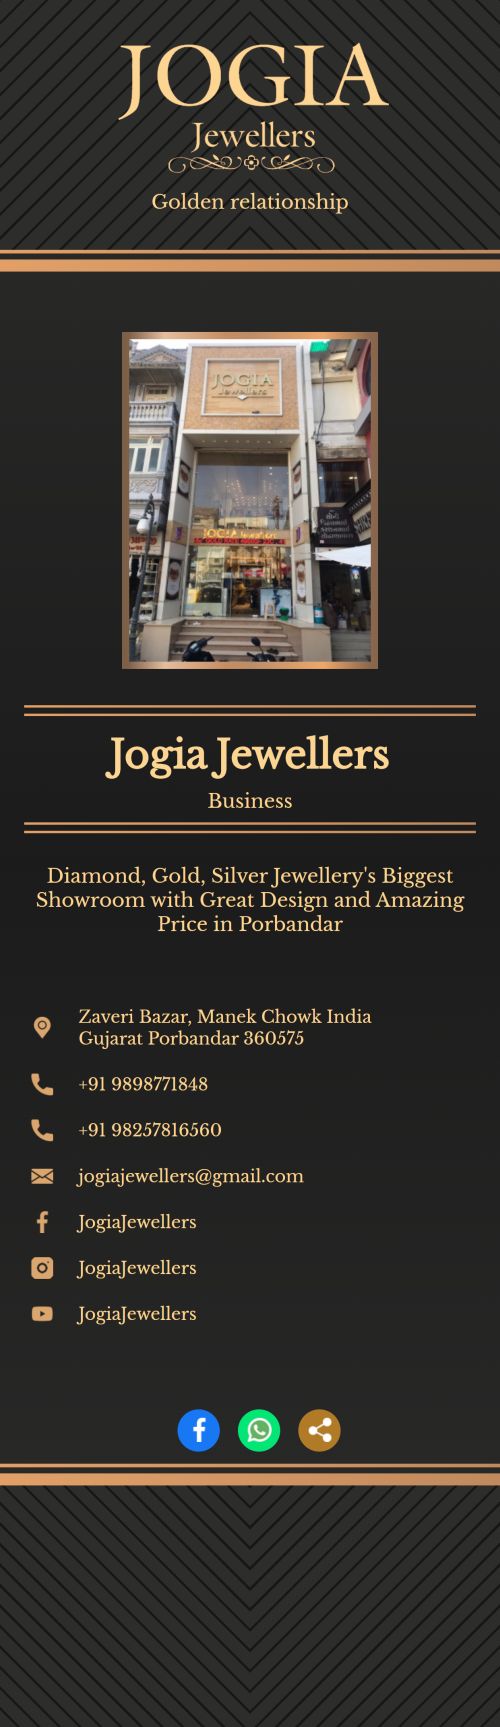 ccl0008 - Jogia Jewellers - Jogia Jewellers - Digital Visiting Card by CardNet